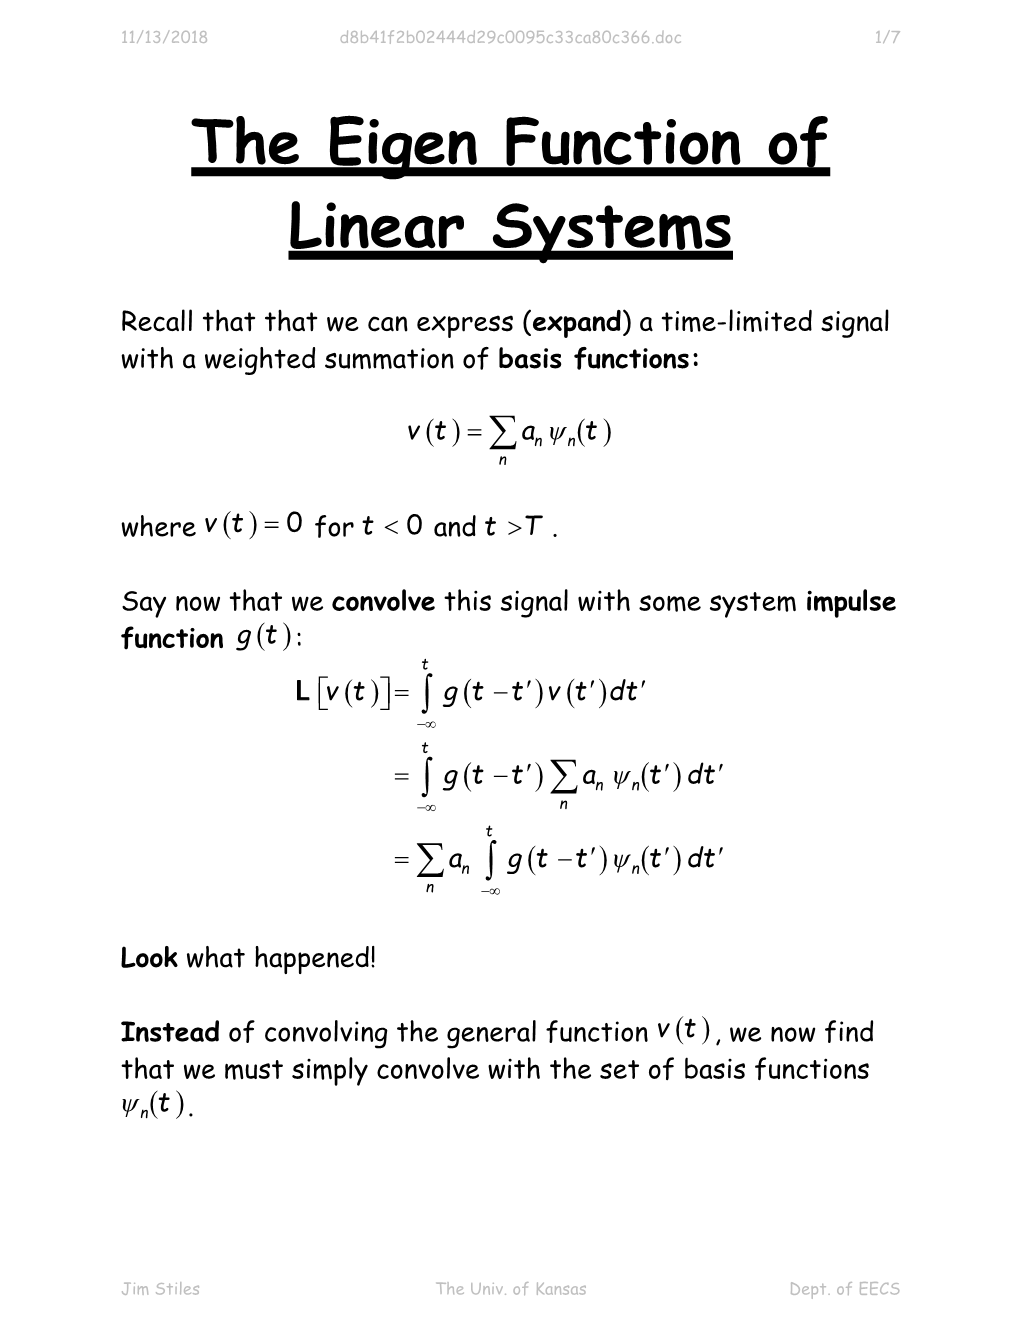 The Eigen Function of Linear,Time-Invariant Systems